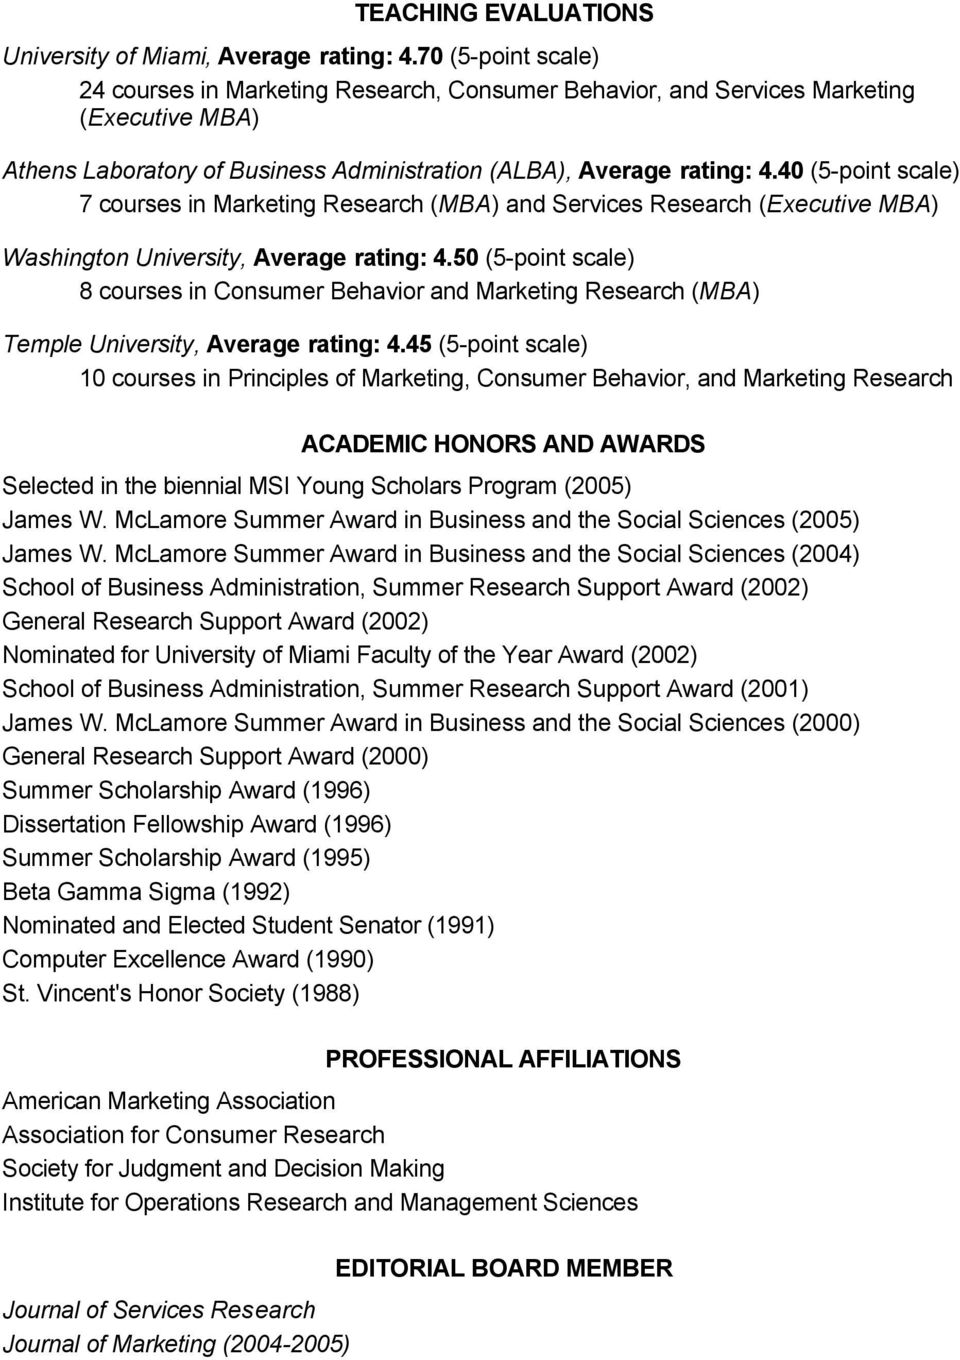 40 (5-point scale) 7 courses in Marketing Research (MBA) and Services Research (Executive MBA) Washington University, Average rating: 4.